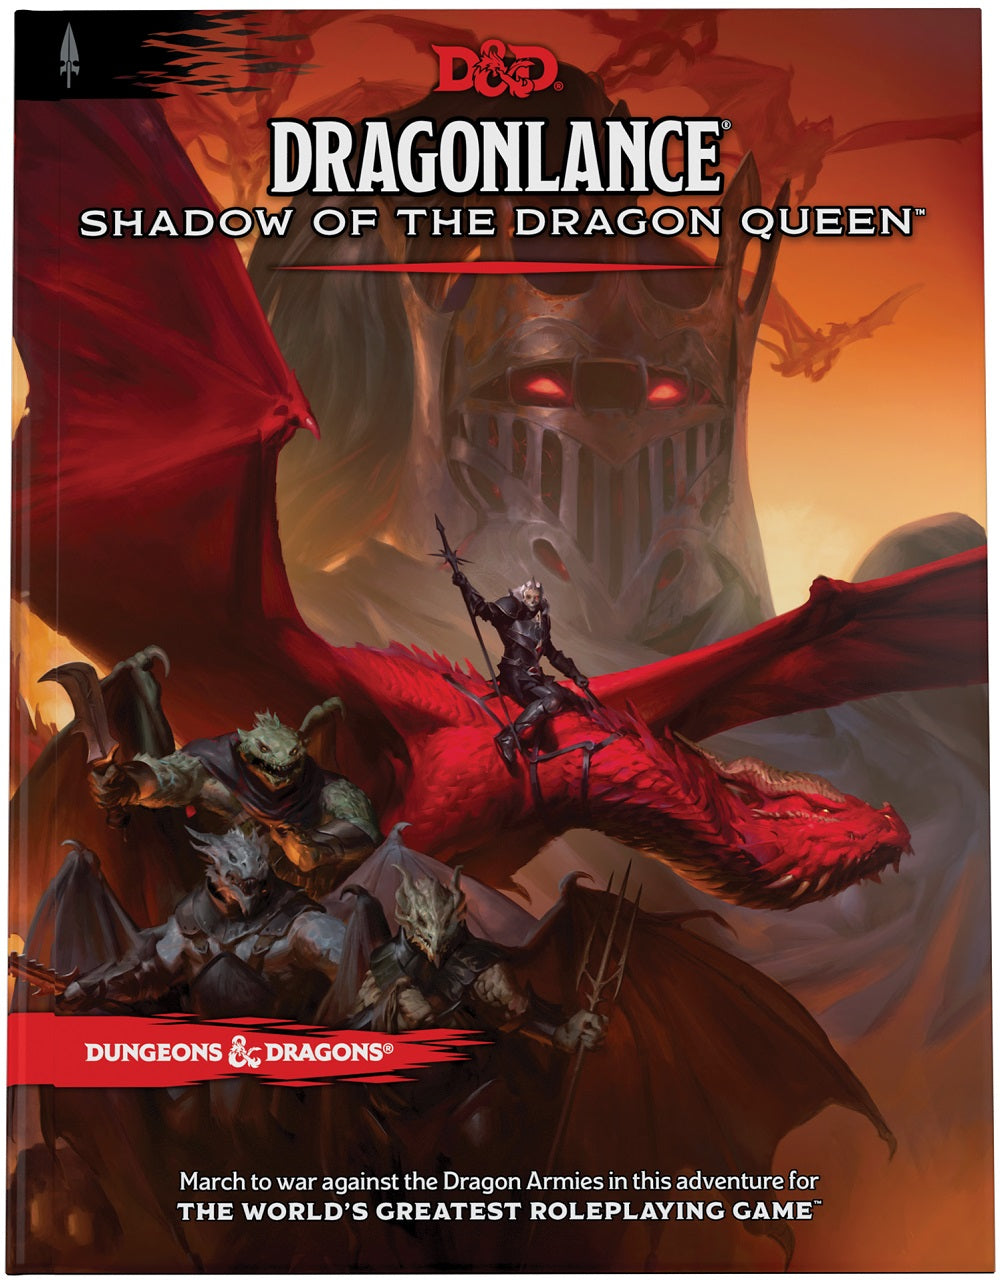 D&D RPG Dragonlance Shadow of the Dragon Queen